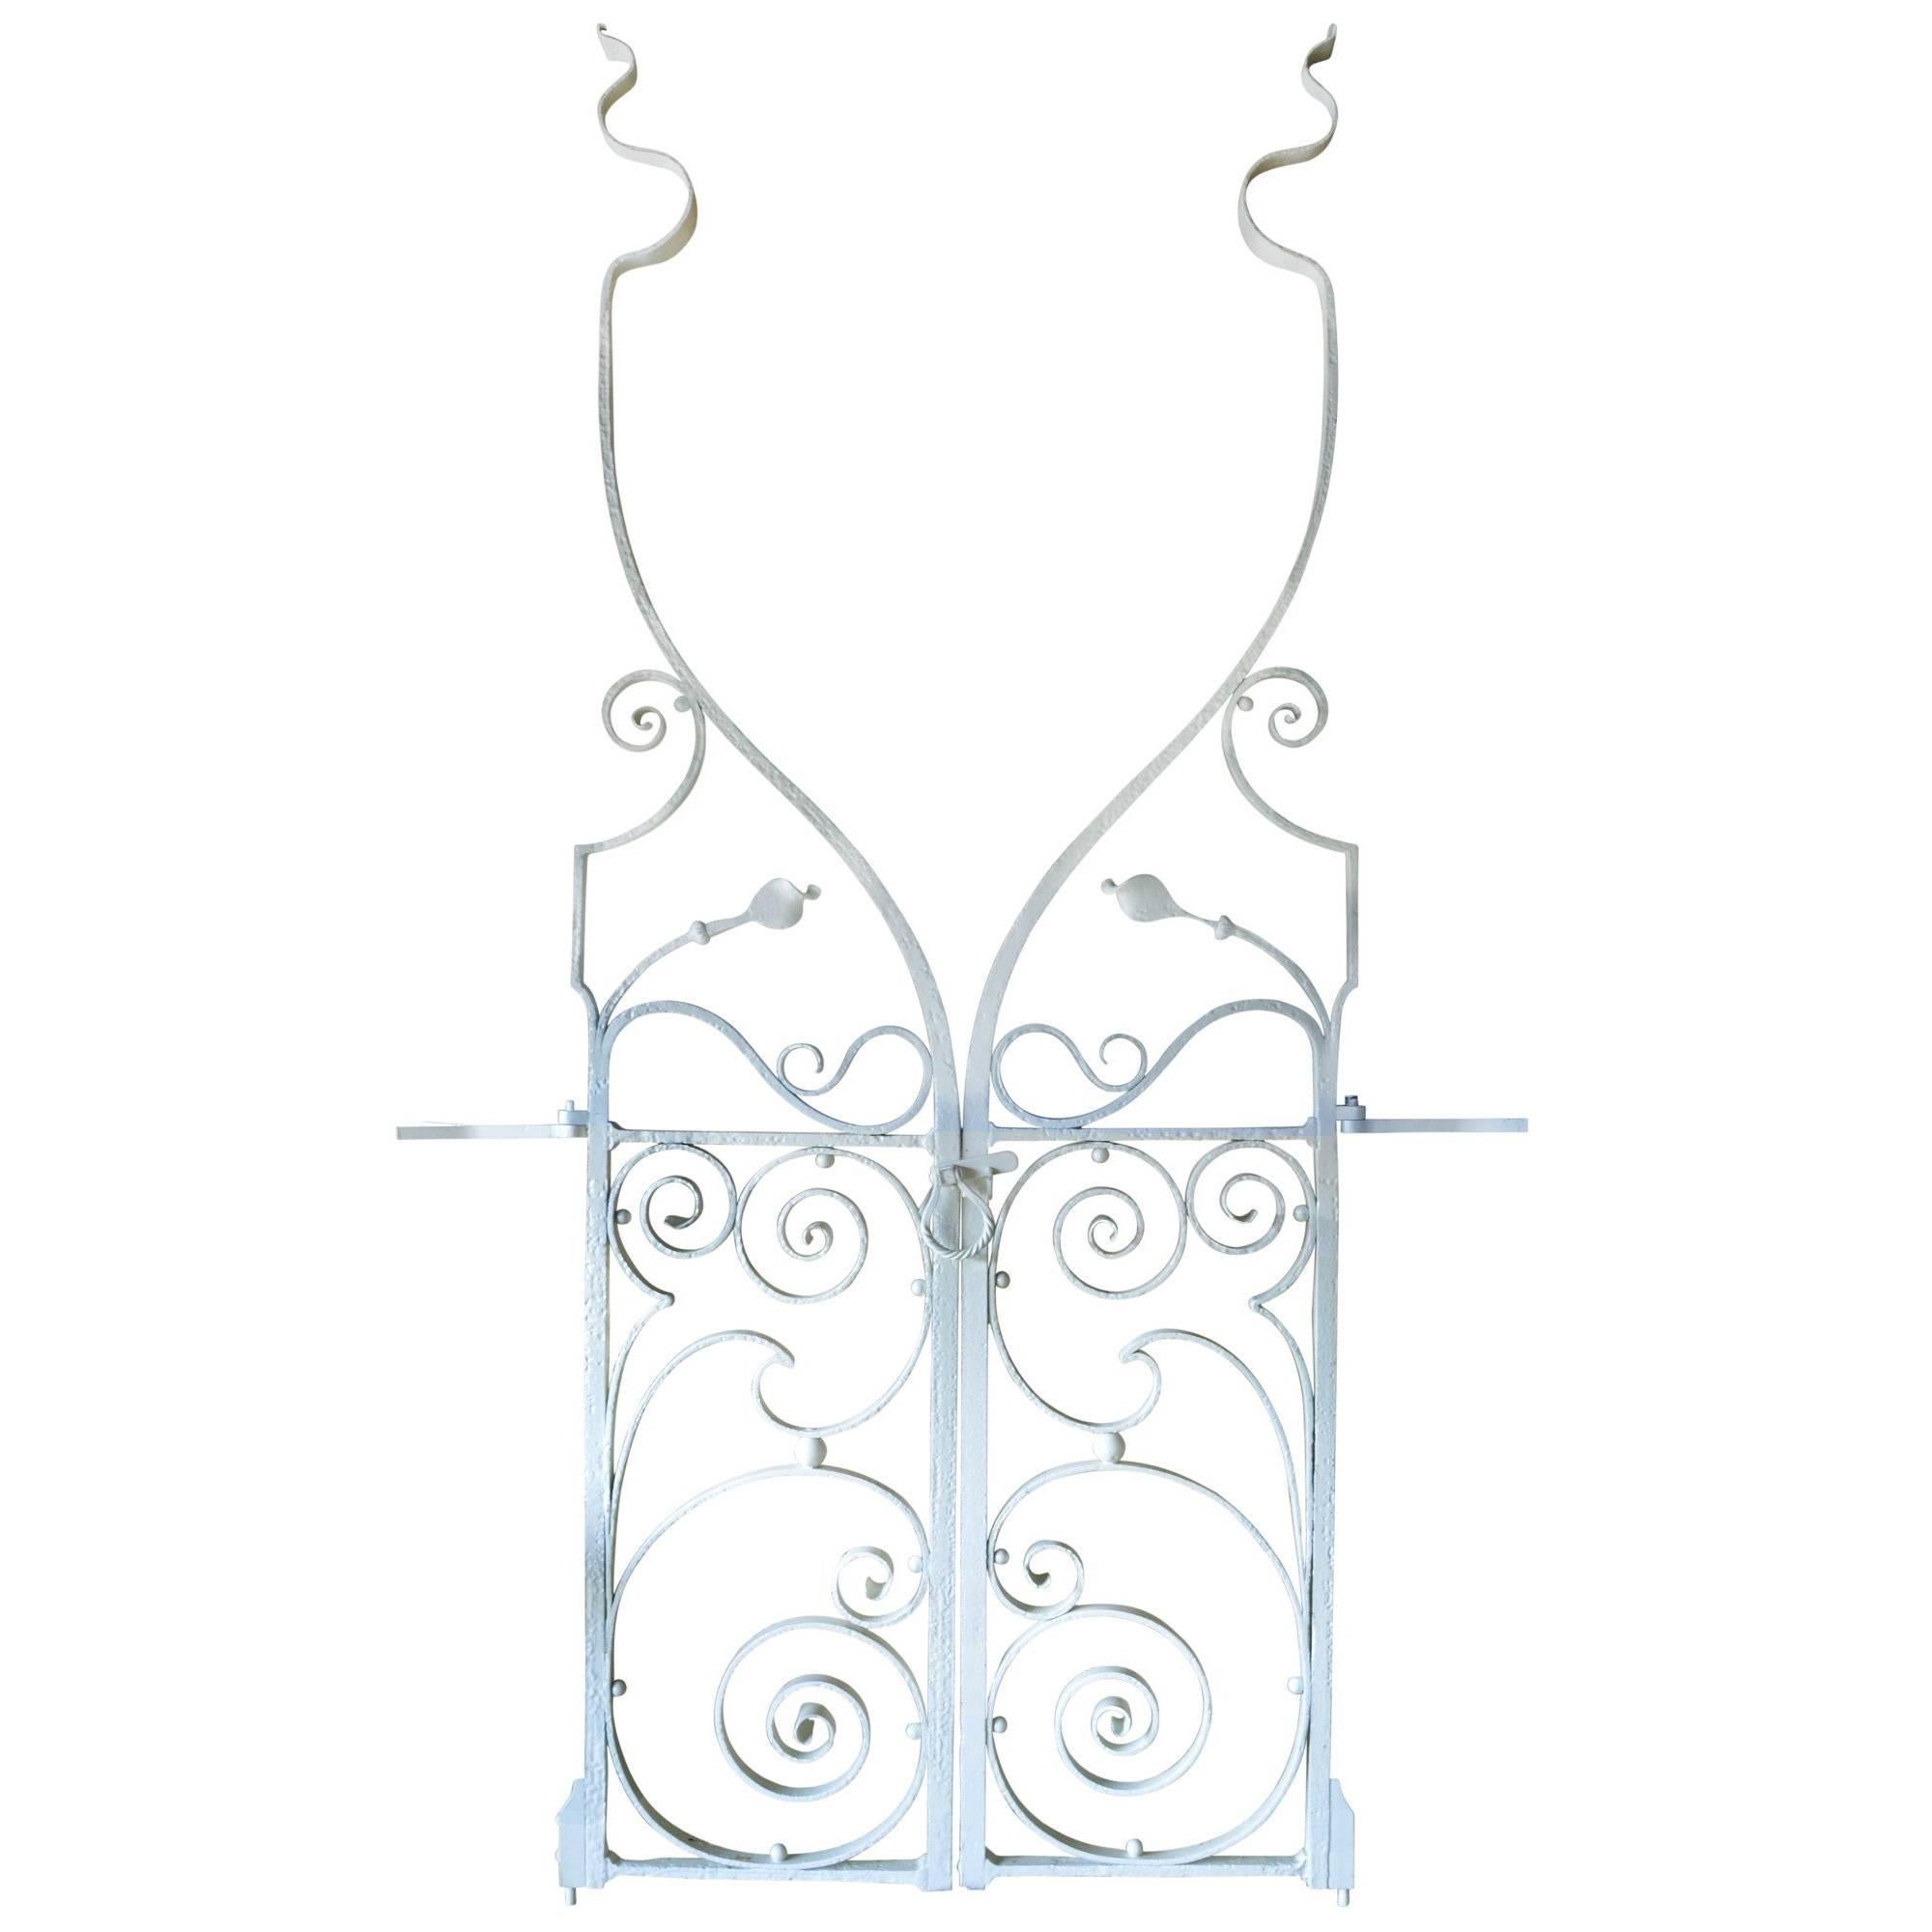 Pair of Extraordinary Early 20th Century Wrought Iron Garden Gates For Sale